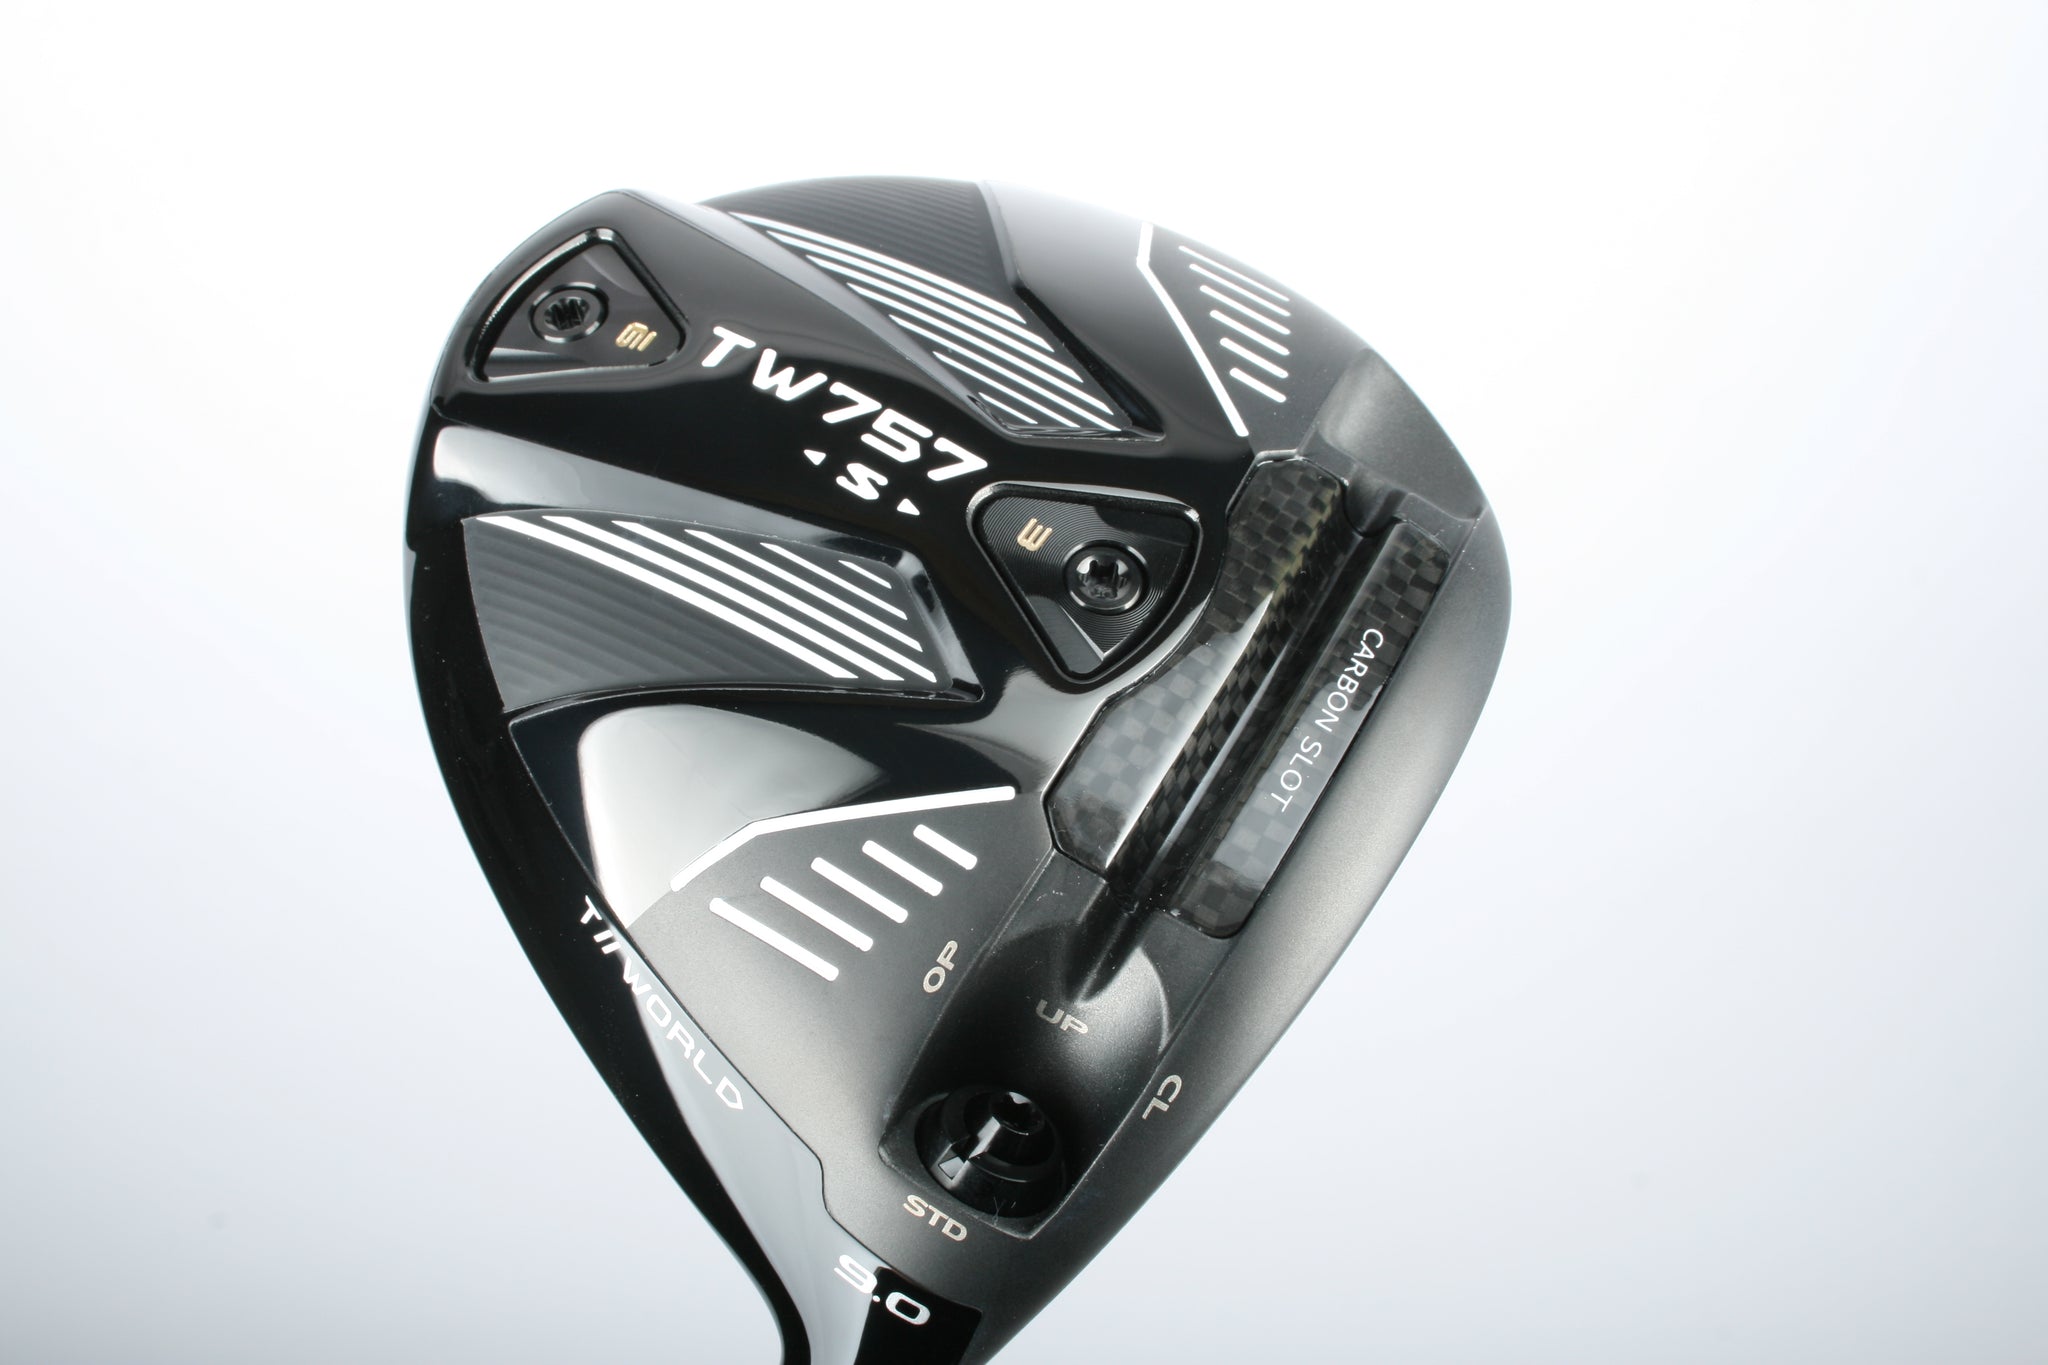 Honma TW757 Driver: D & S Lofts, Specs and Review - Buy from the